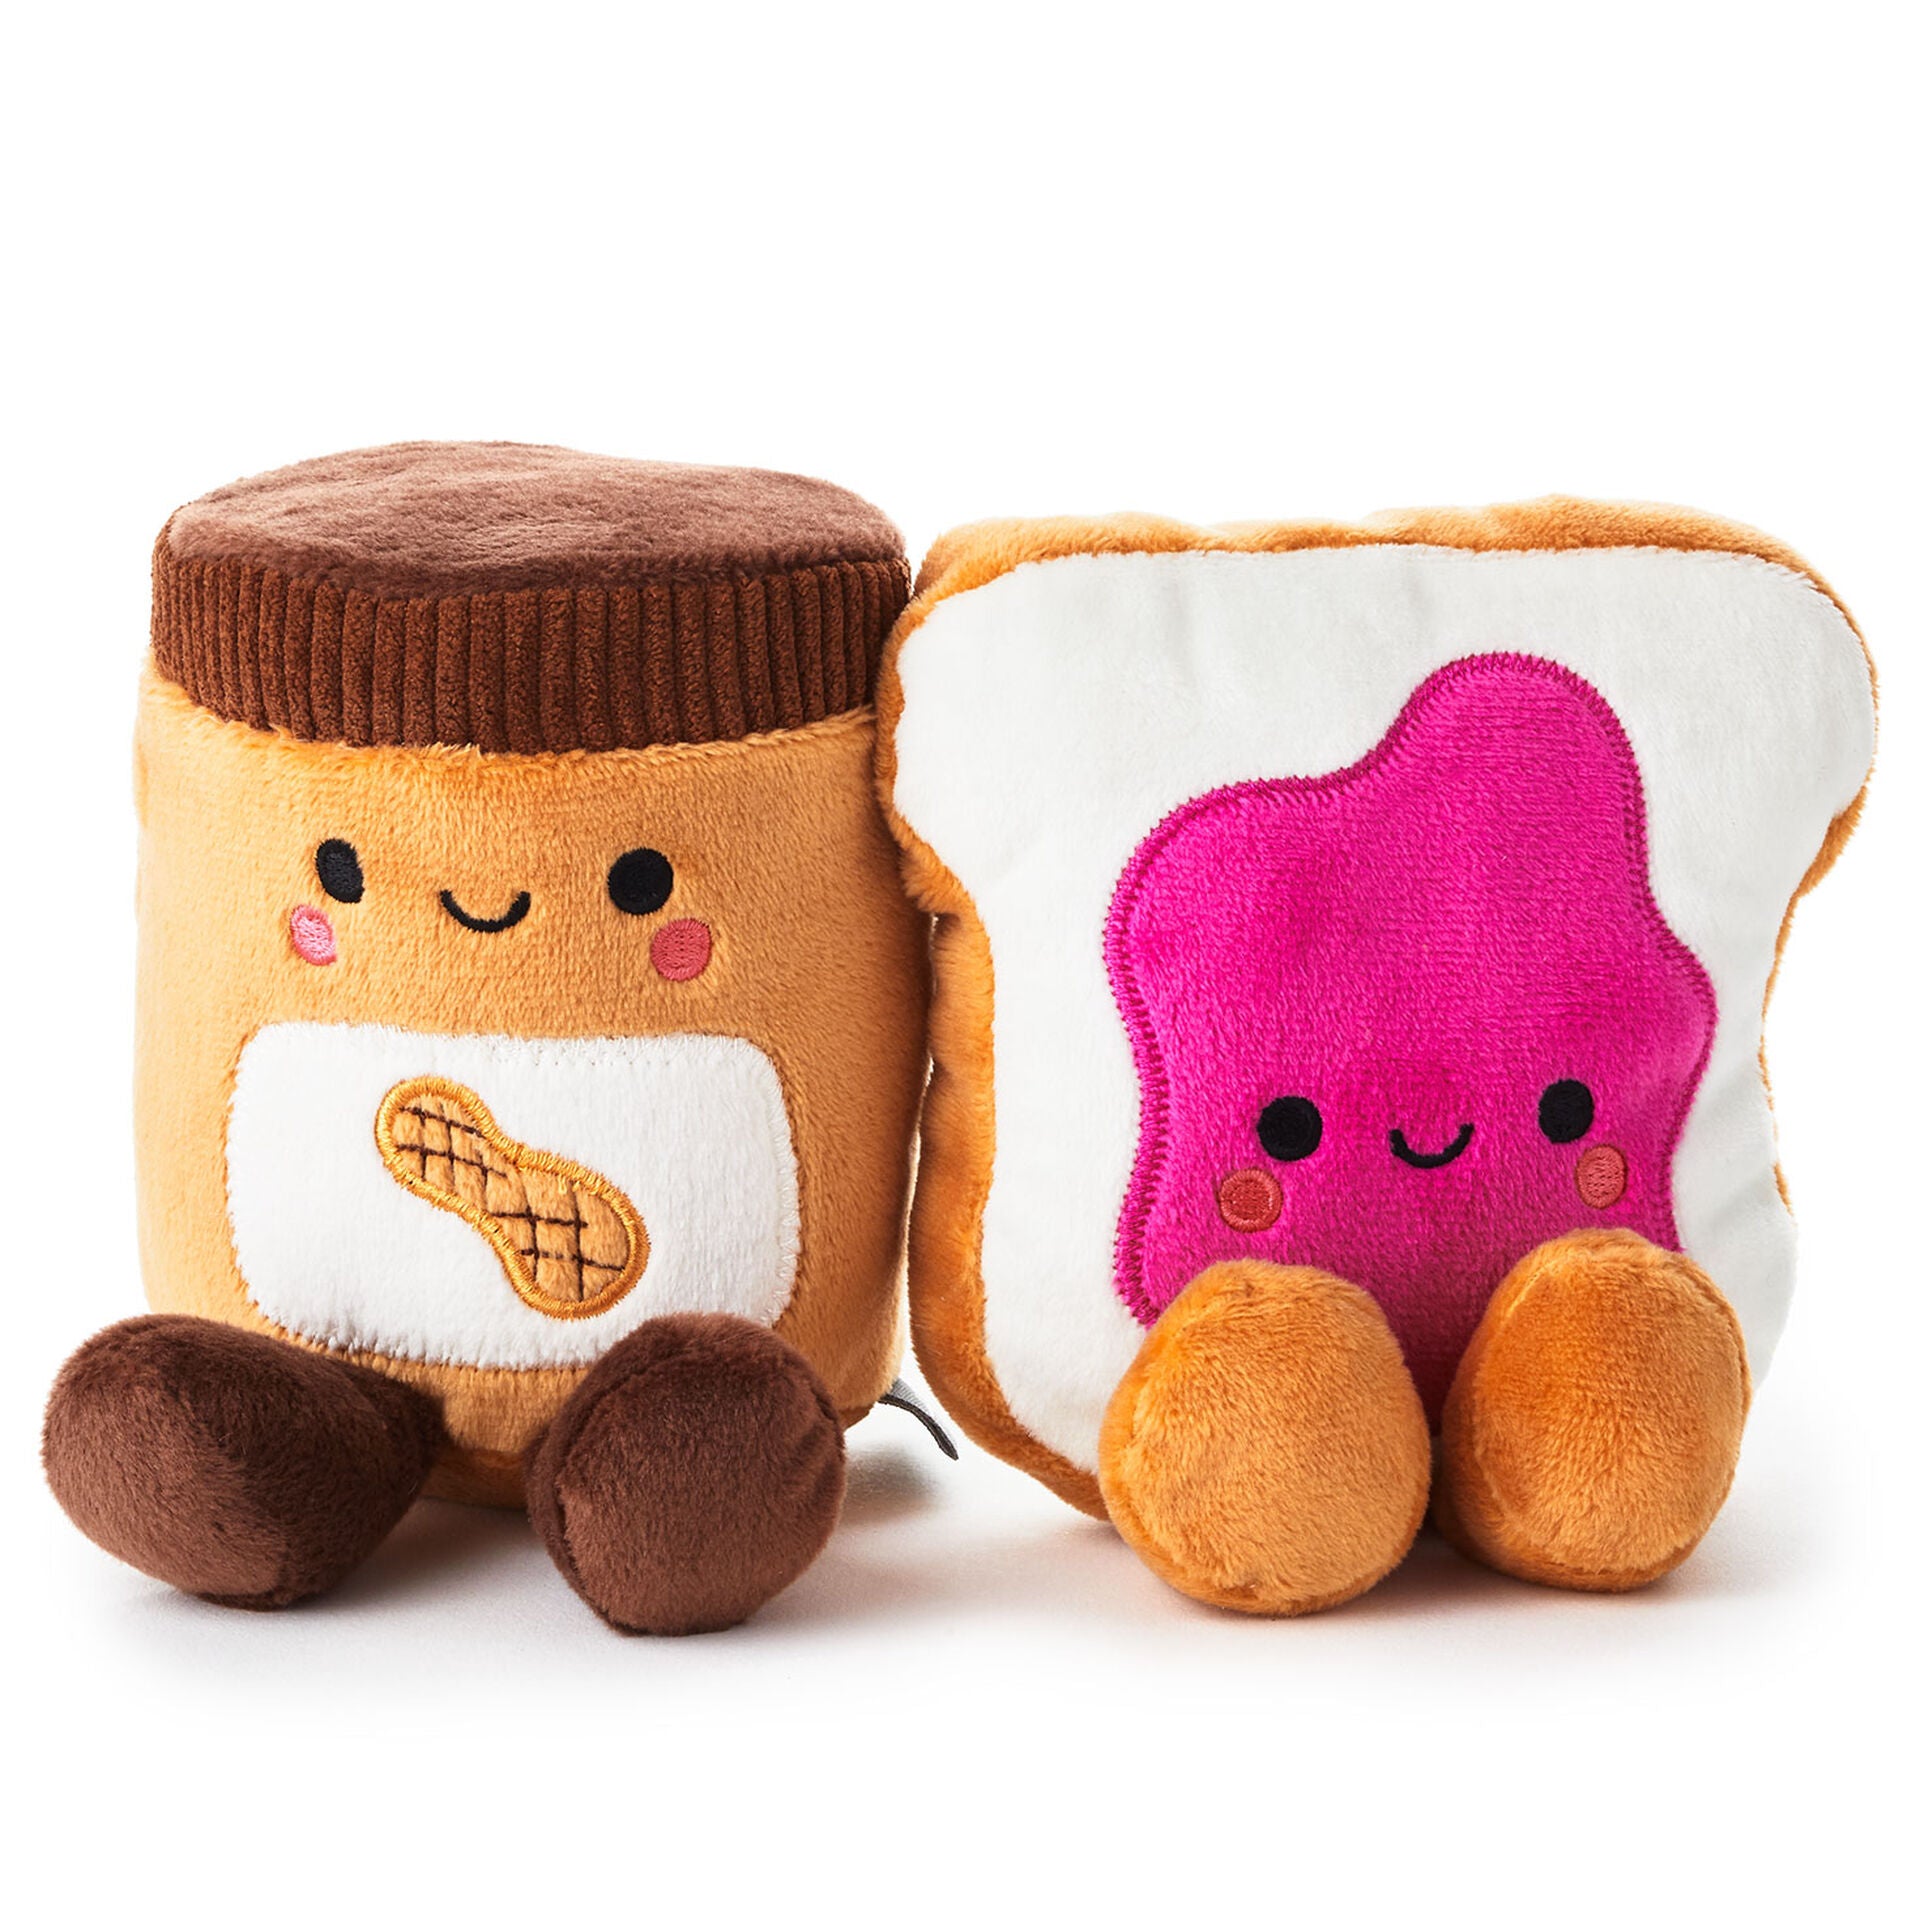 Better Together Peanut Butter and Jelly Magnetic Plush, 5" Plush Toy Hallmark   